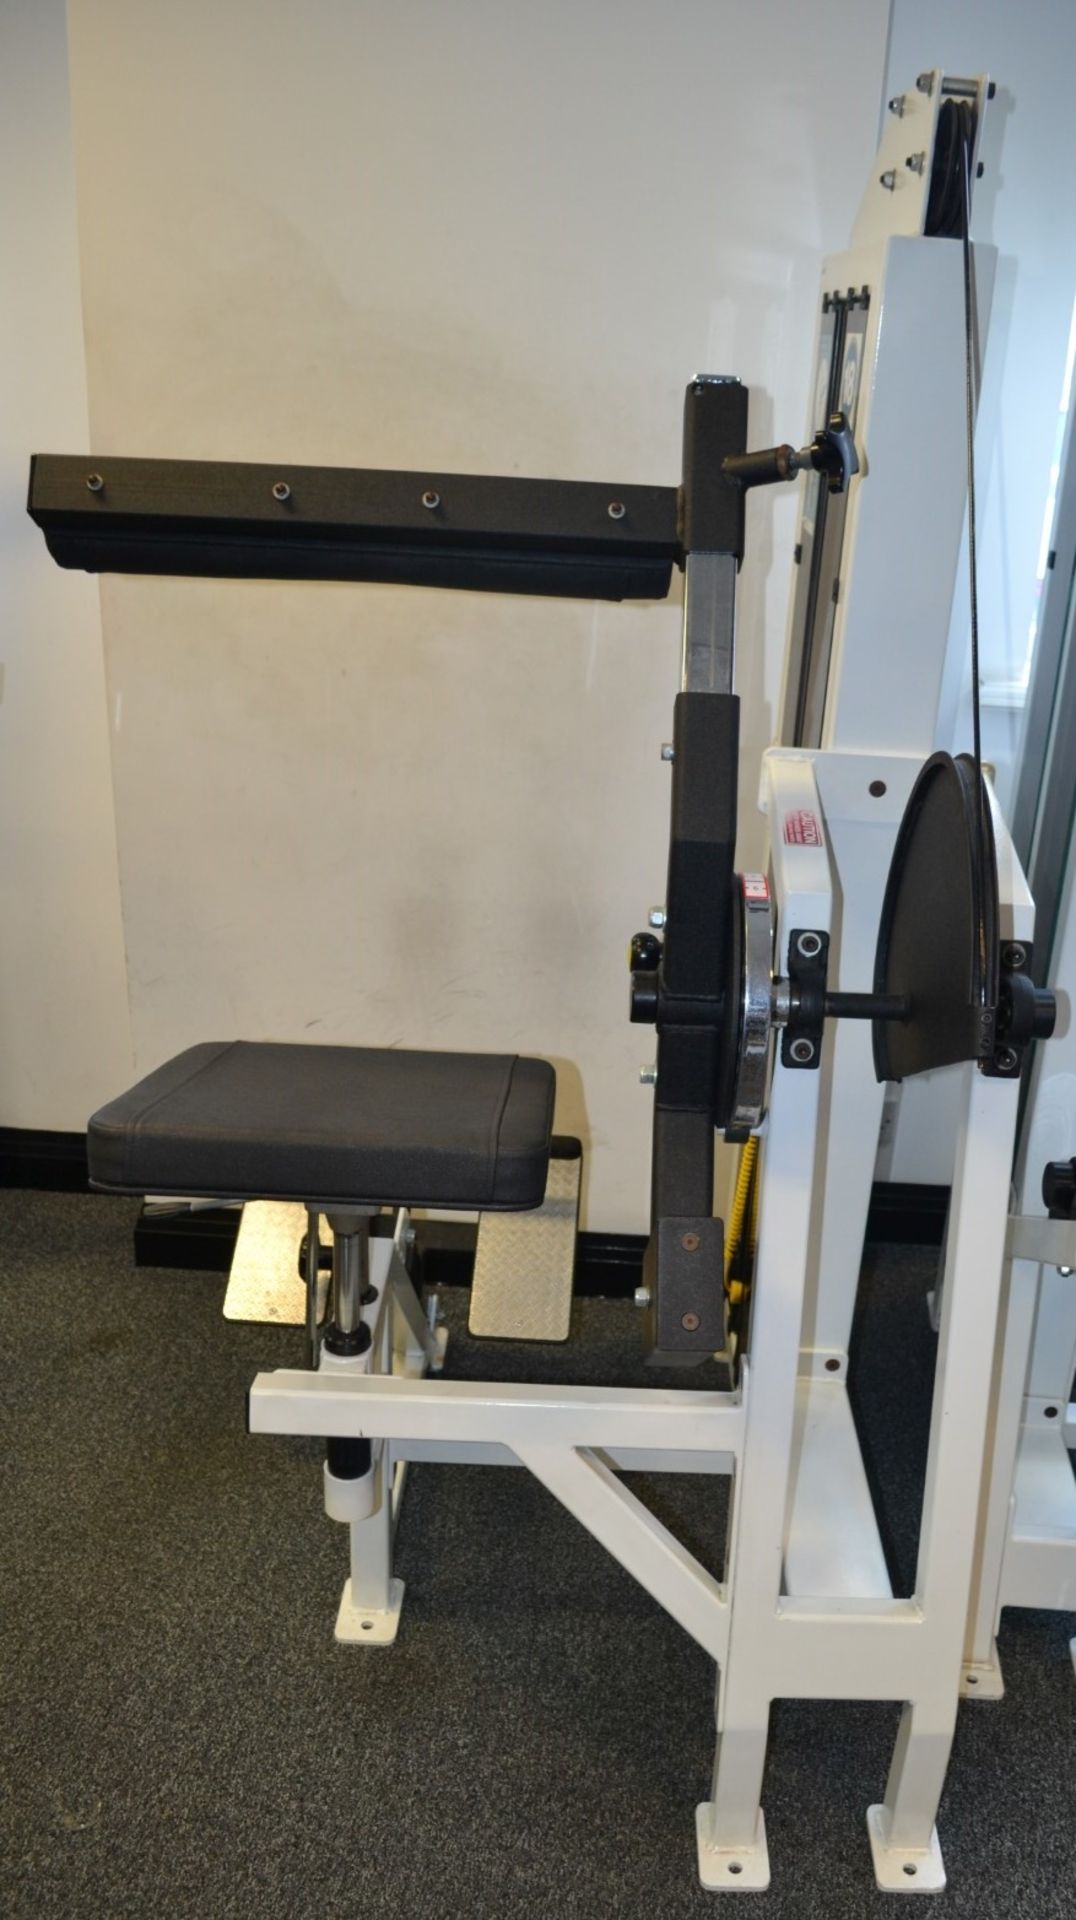 1 x Force Lower Back Pin Loaded Gym Machine With 100kg Weights - Ref: J2026 - Image 4 of 4